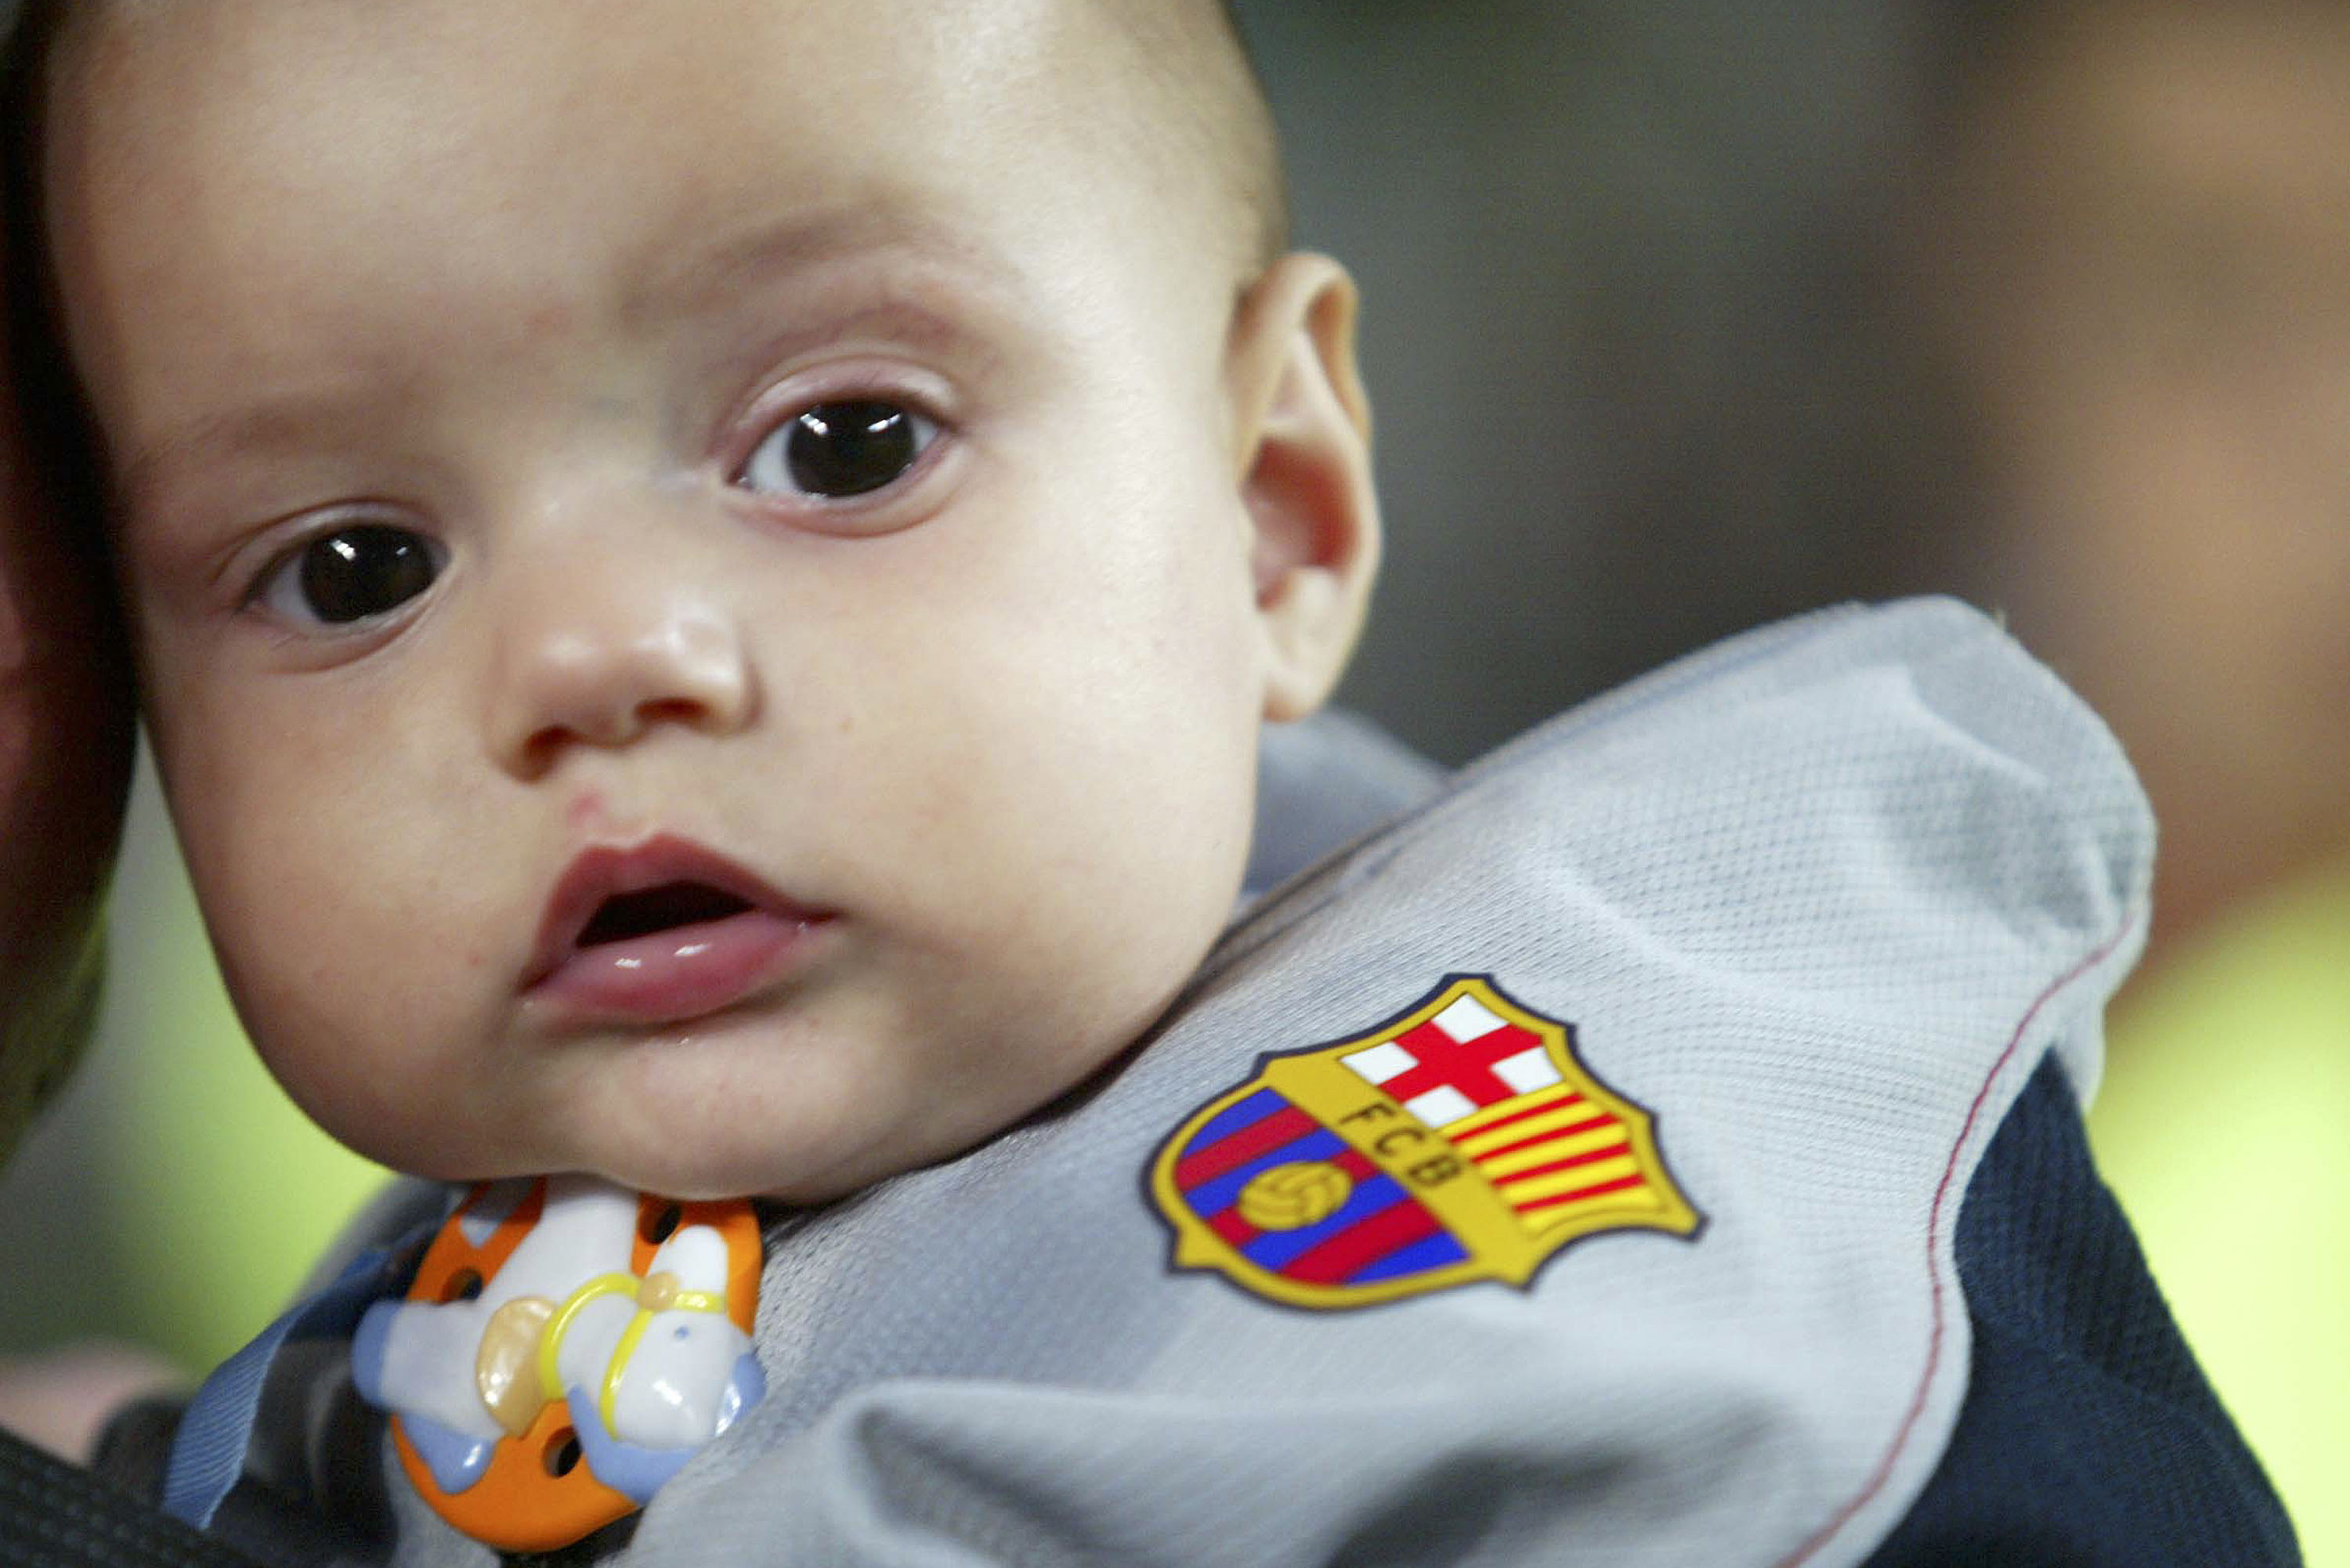 Birth of the Baby Footballer: At What Can You Spot True Sporting Talent? | News, Highlights, and Rumors | Bleacher Report